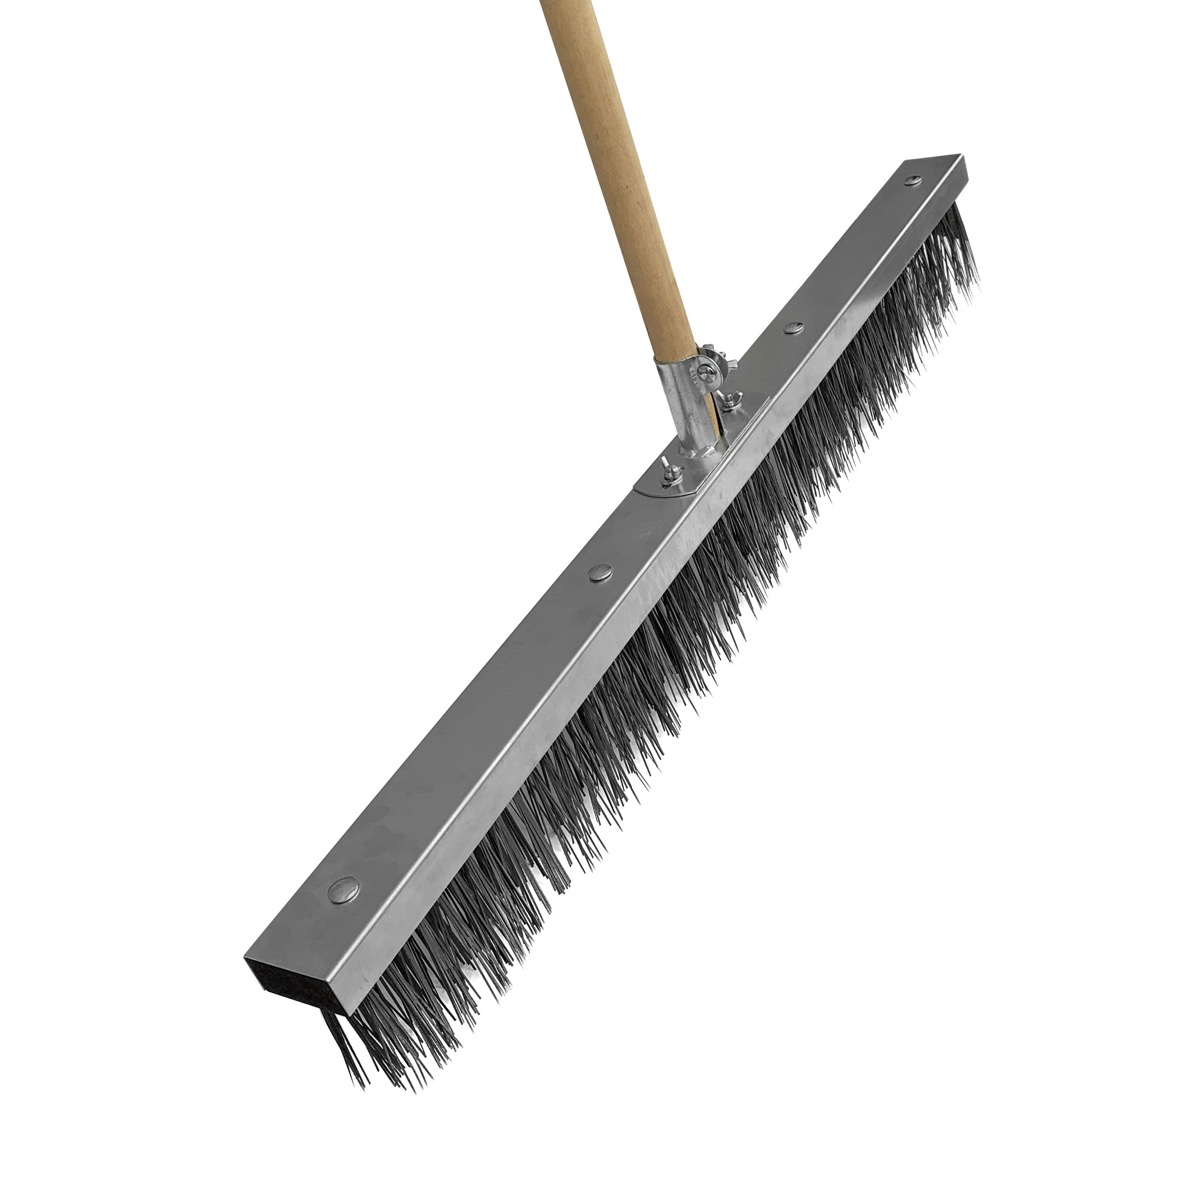 Metal brush for texturing concrete available at a 3ft width. Bracket and broom attached.